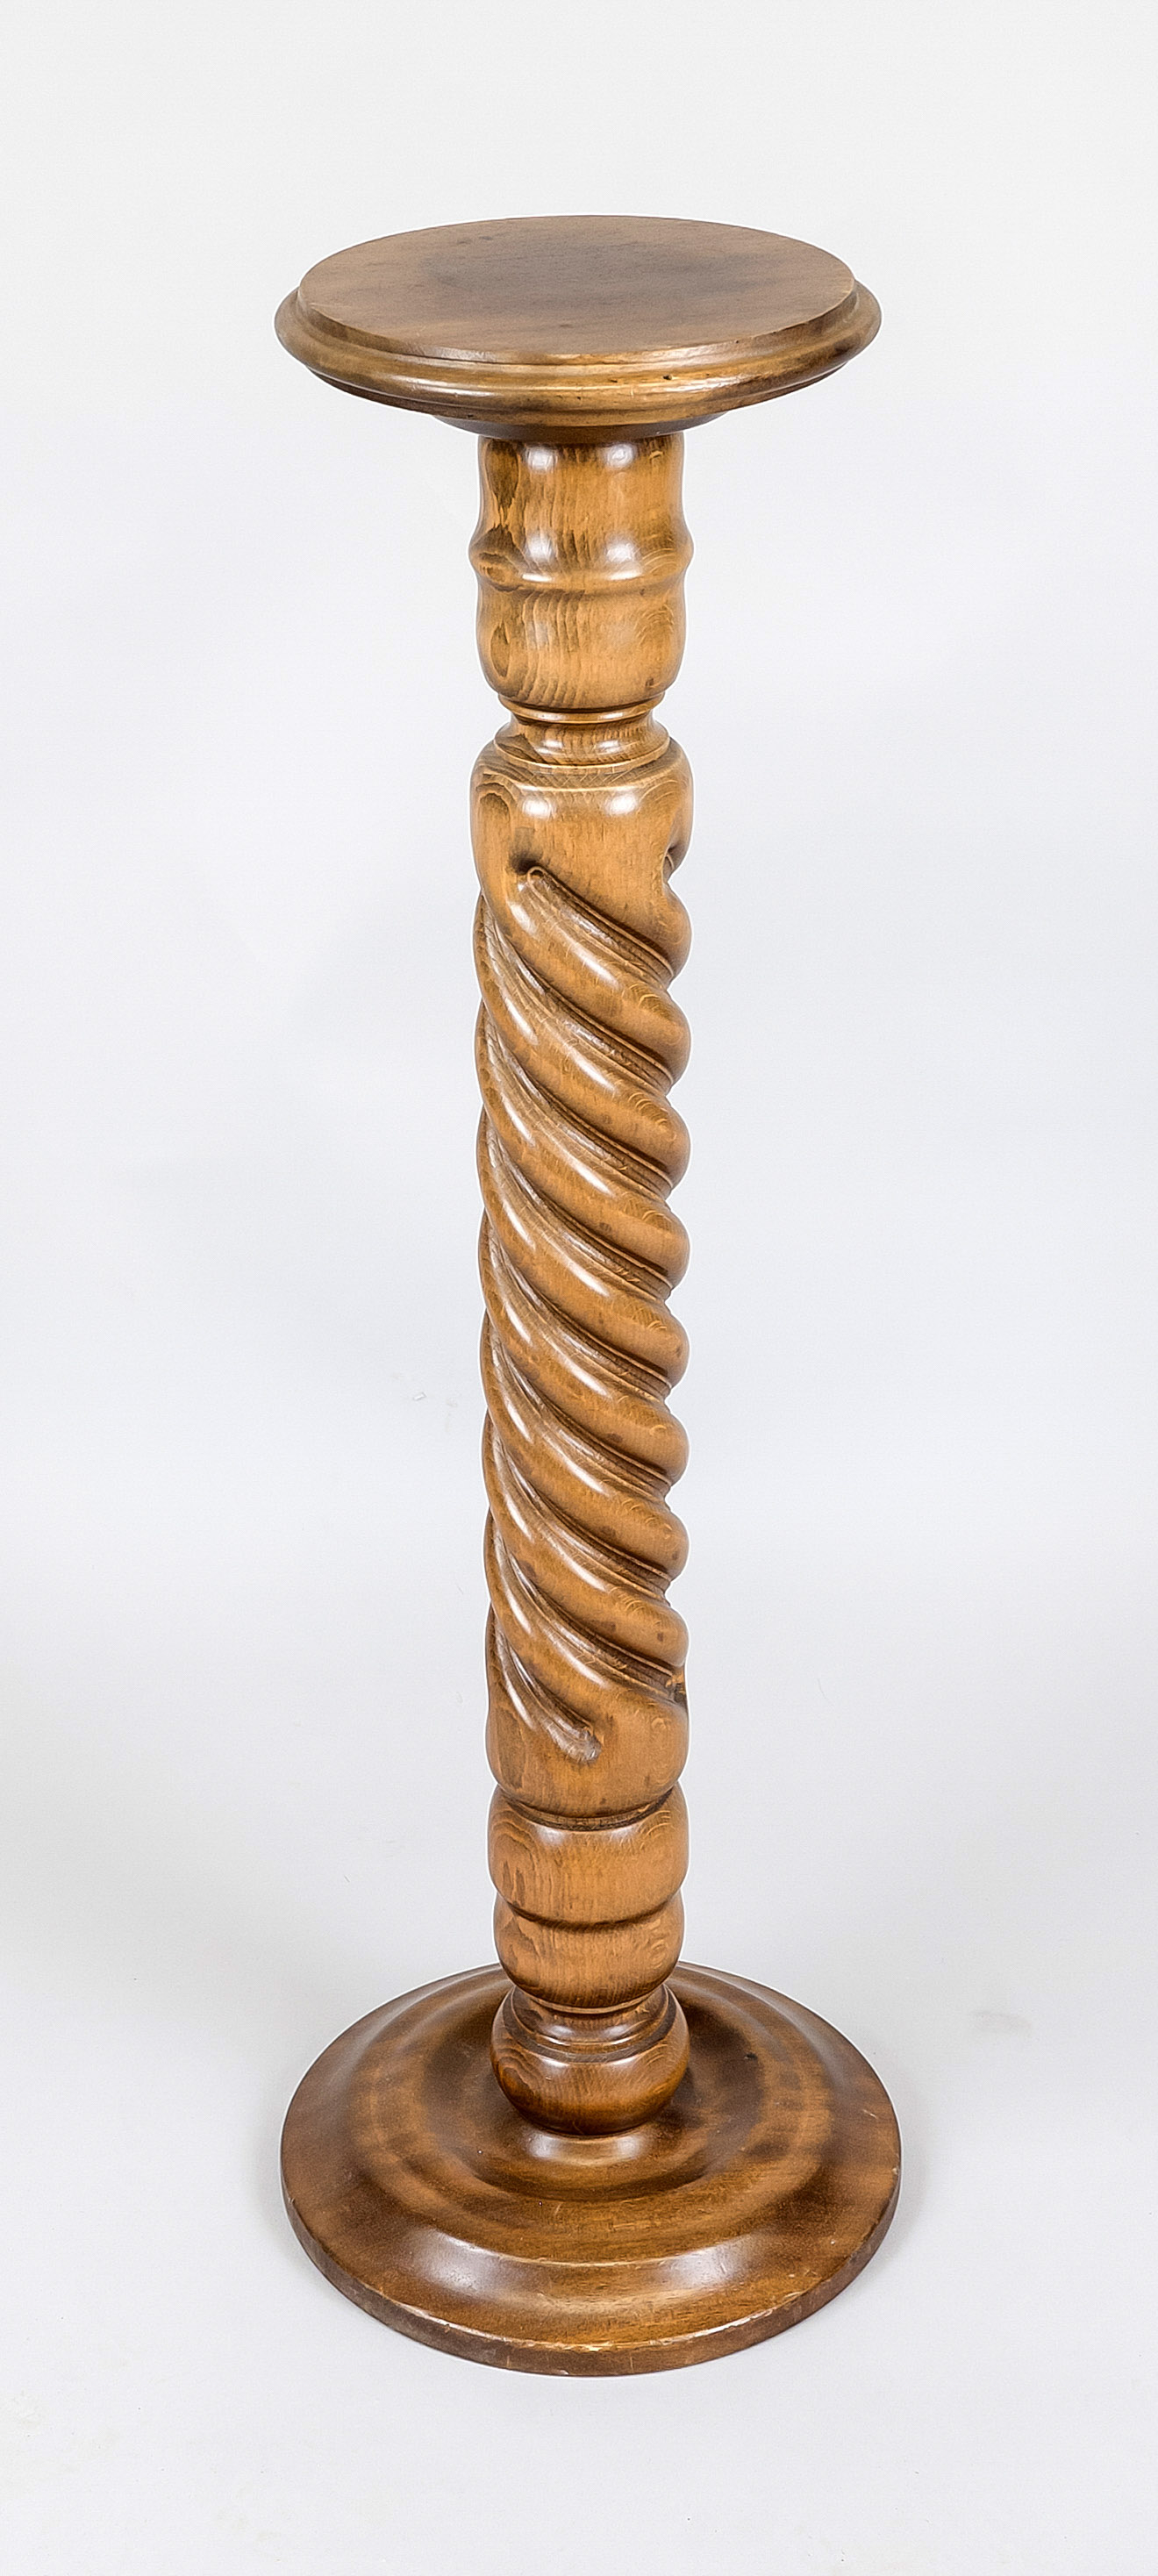 Flower column, 20th century, finely grained hardwood, turned shaft, round top plate, h. 88 cm